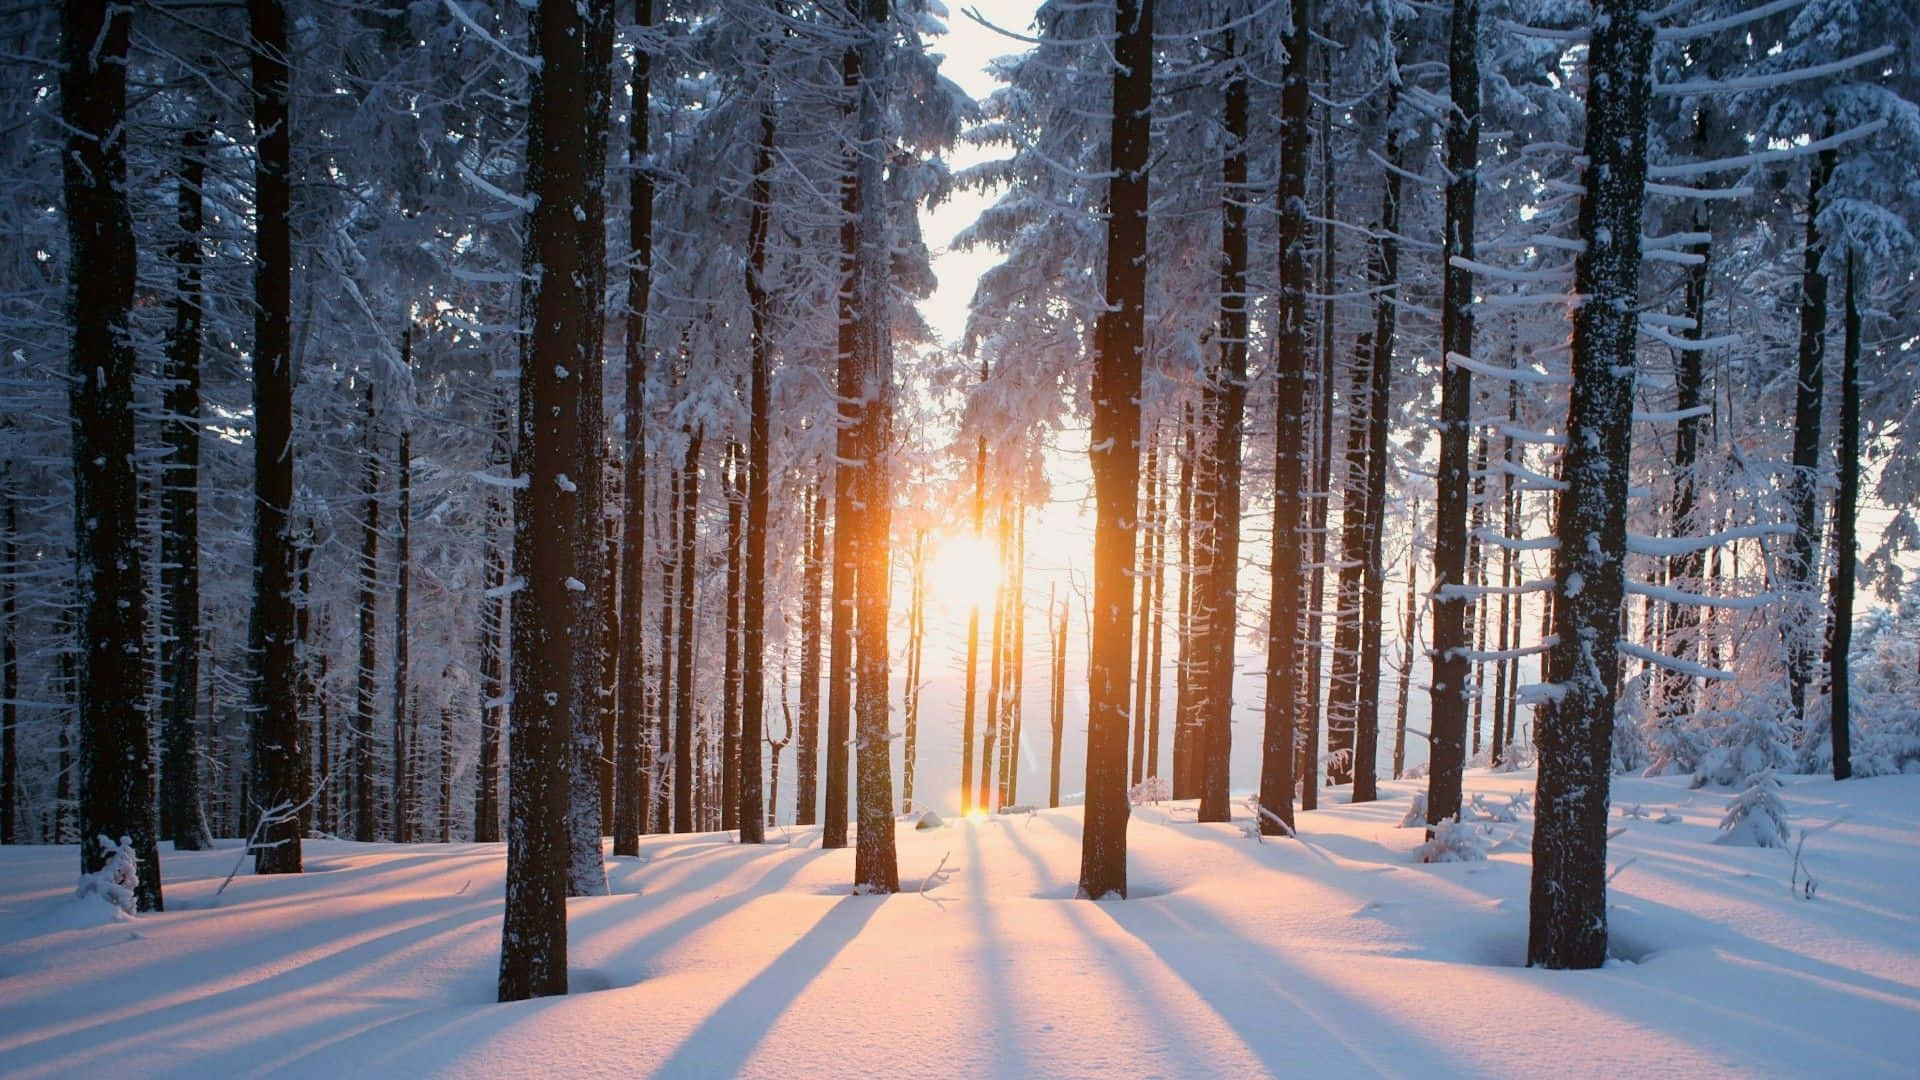 View of a Peaceful Snowy Forest